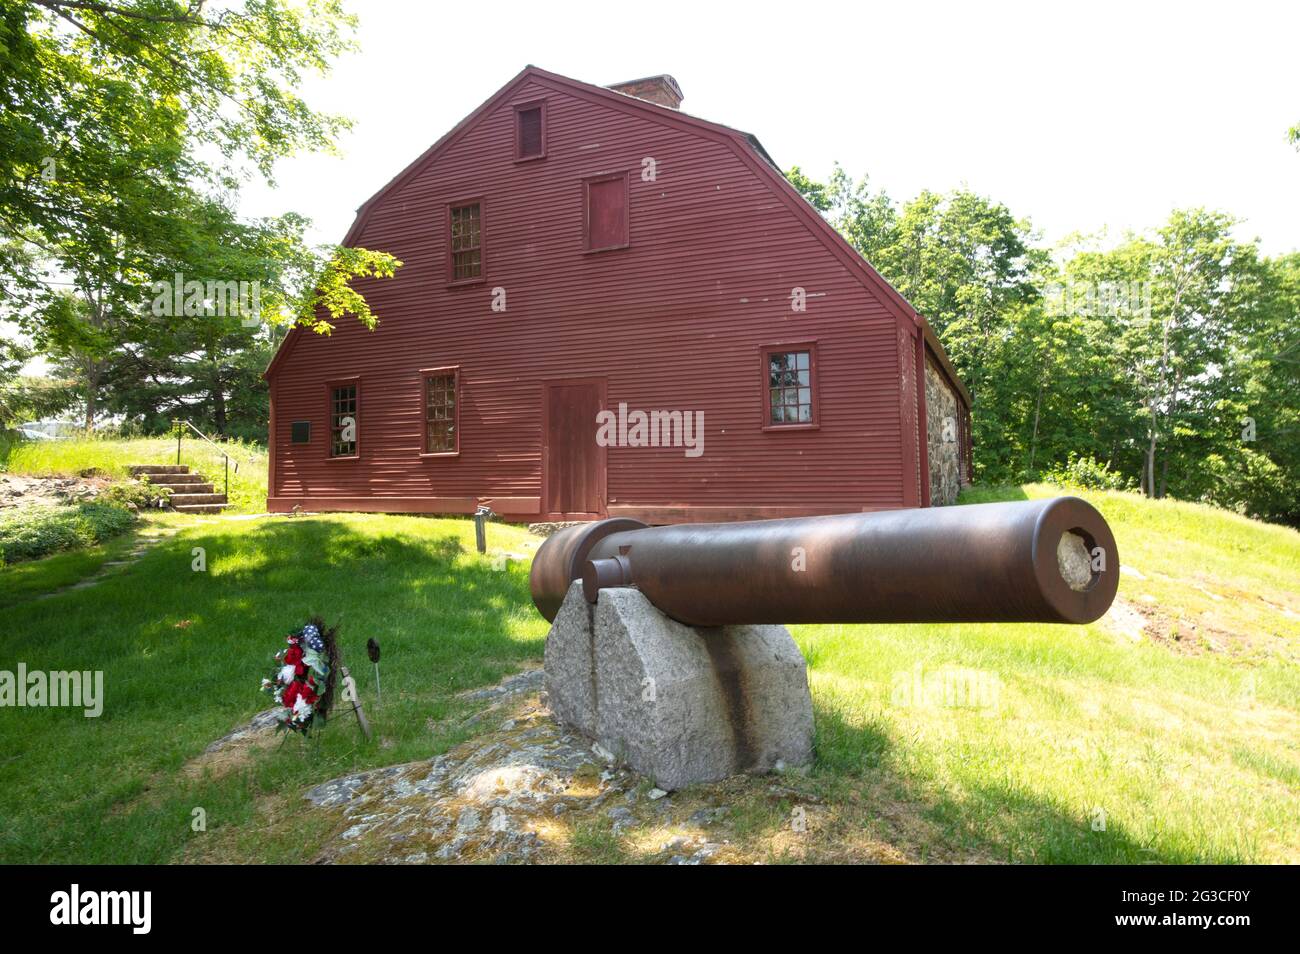 A cannon in front of The Old York Gaol - 1720 - one of the oldest prison buildings in the US - York Village, Maine, USA.  A historical site. Stock Photo